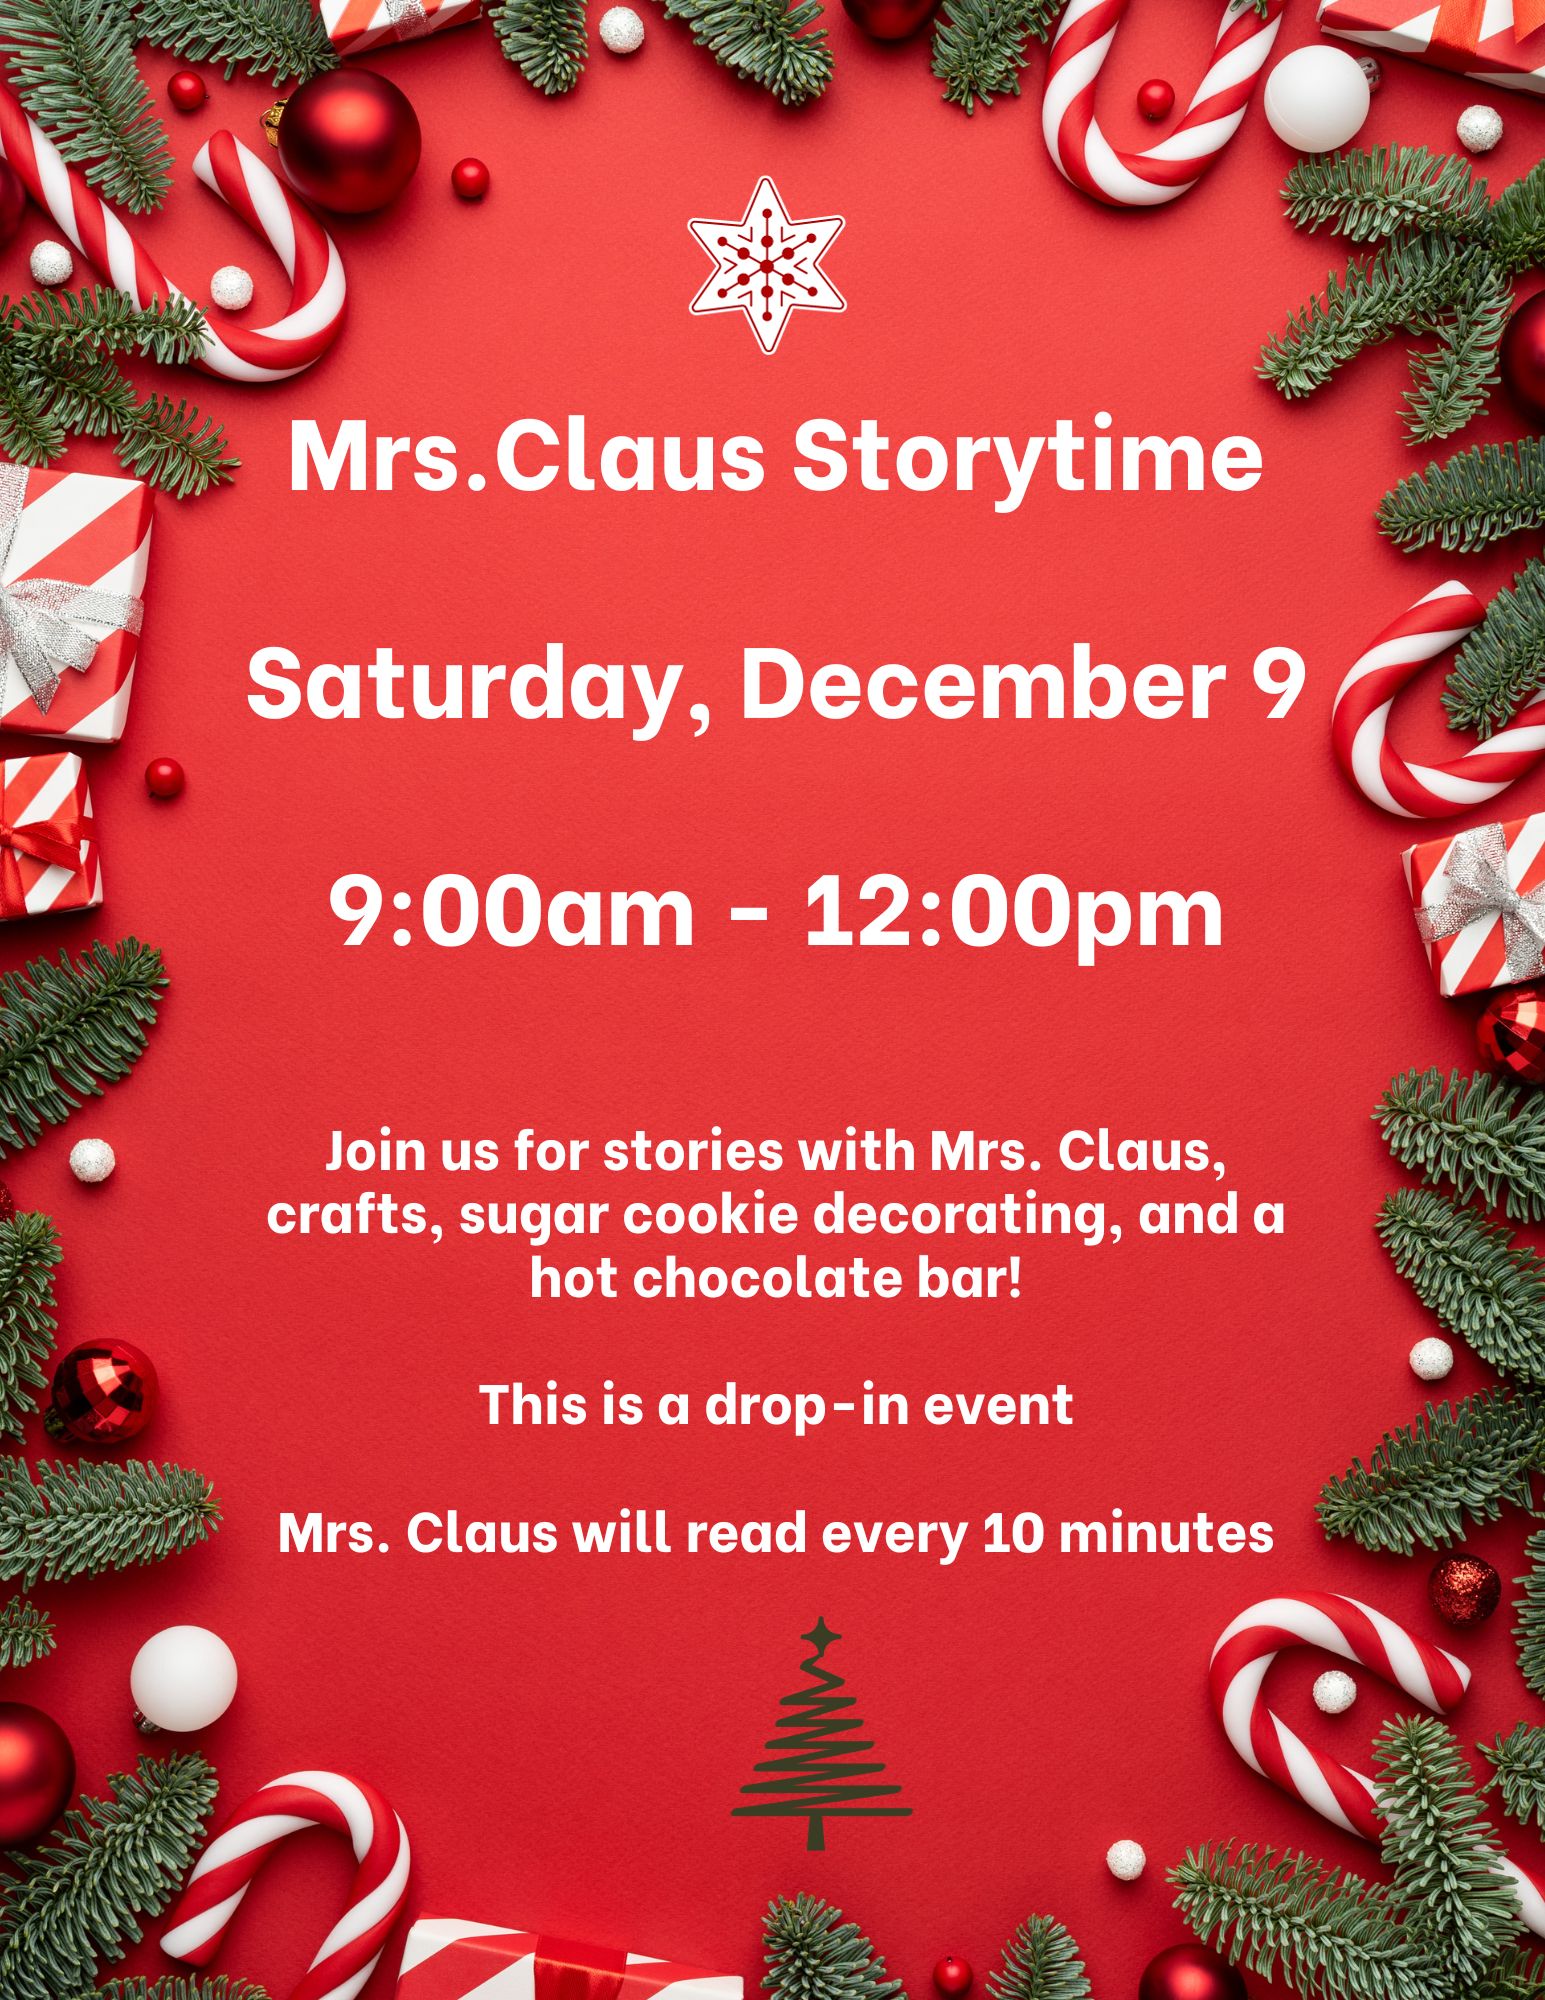 Mrs. Claus Storytime is a red flyer with white letters. Candy canes and greenery around the outside